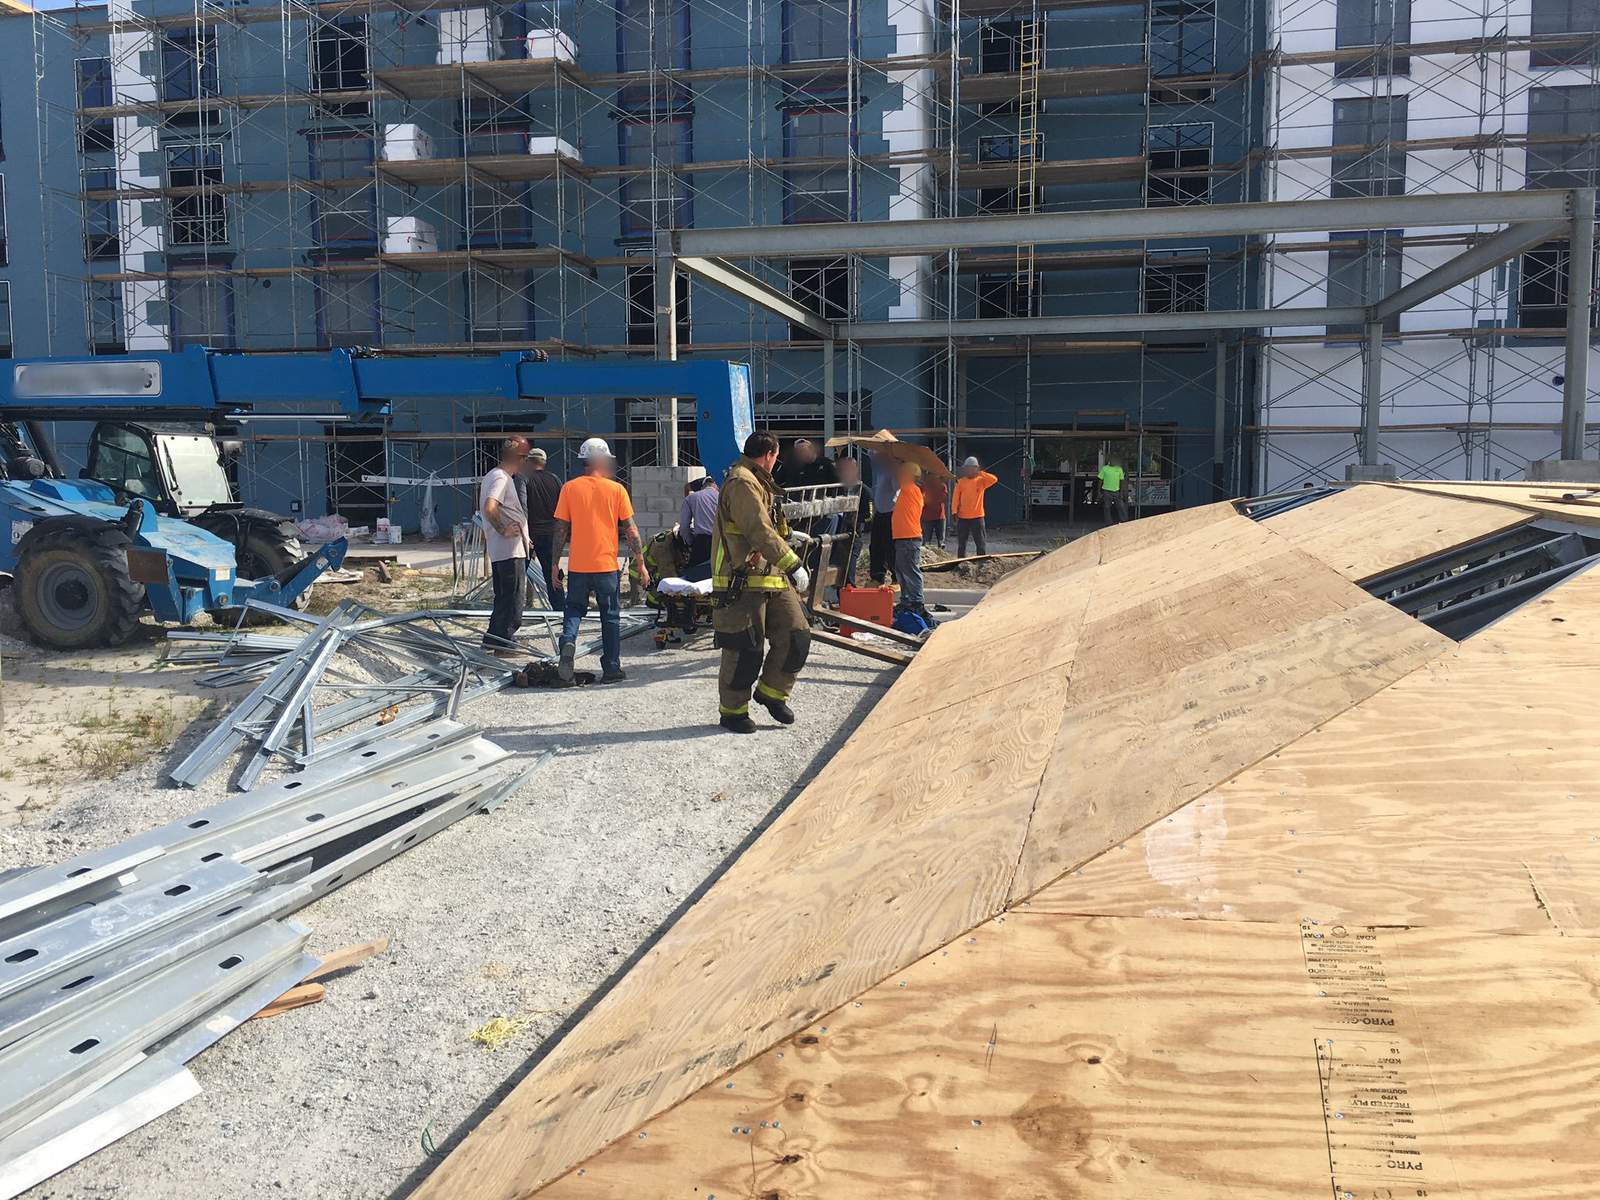 Construction workers injured in crane accident in Viera